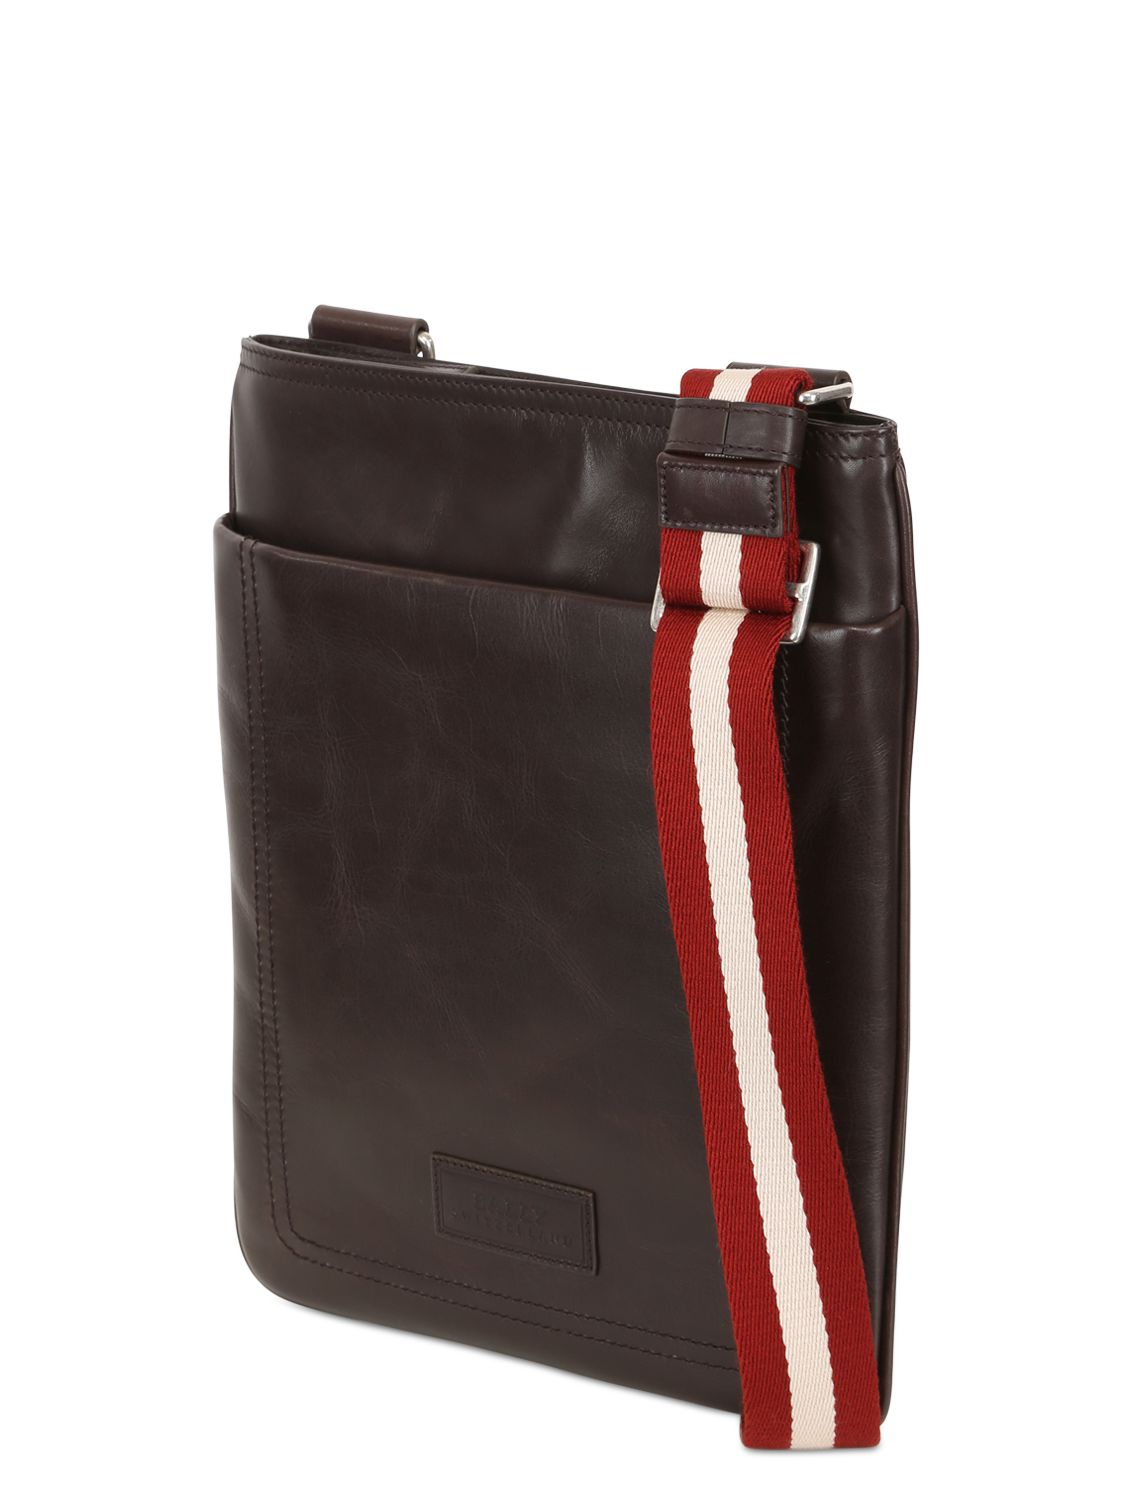 Lyst - Bally Leather Crossbody Bag in Brown for Men